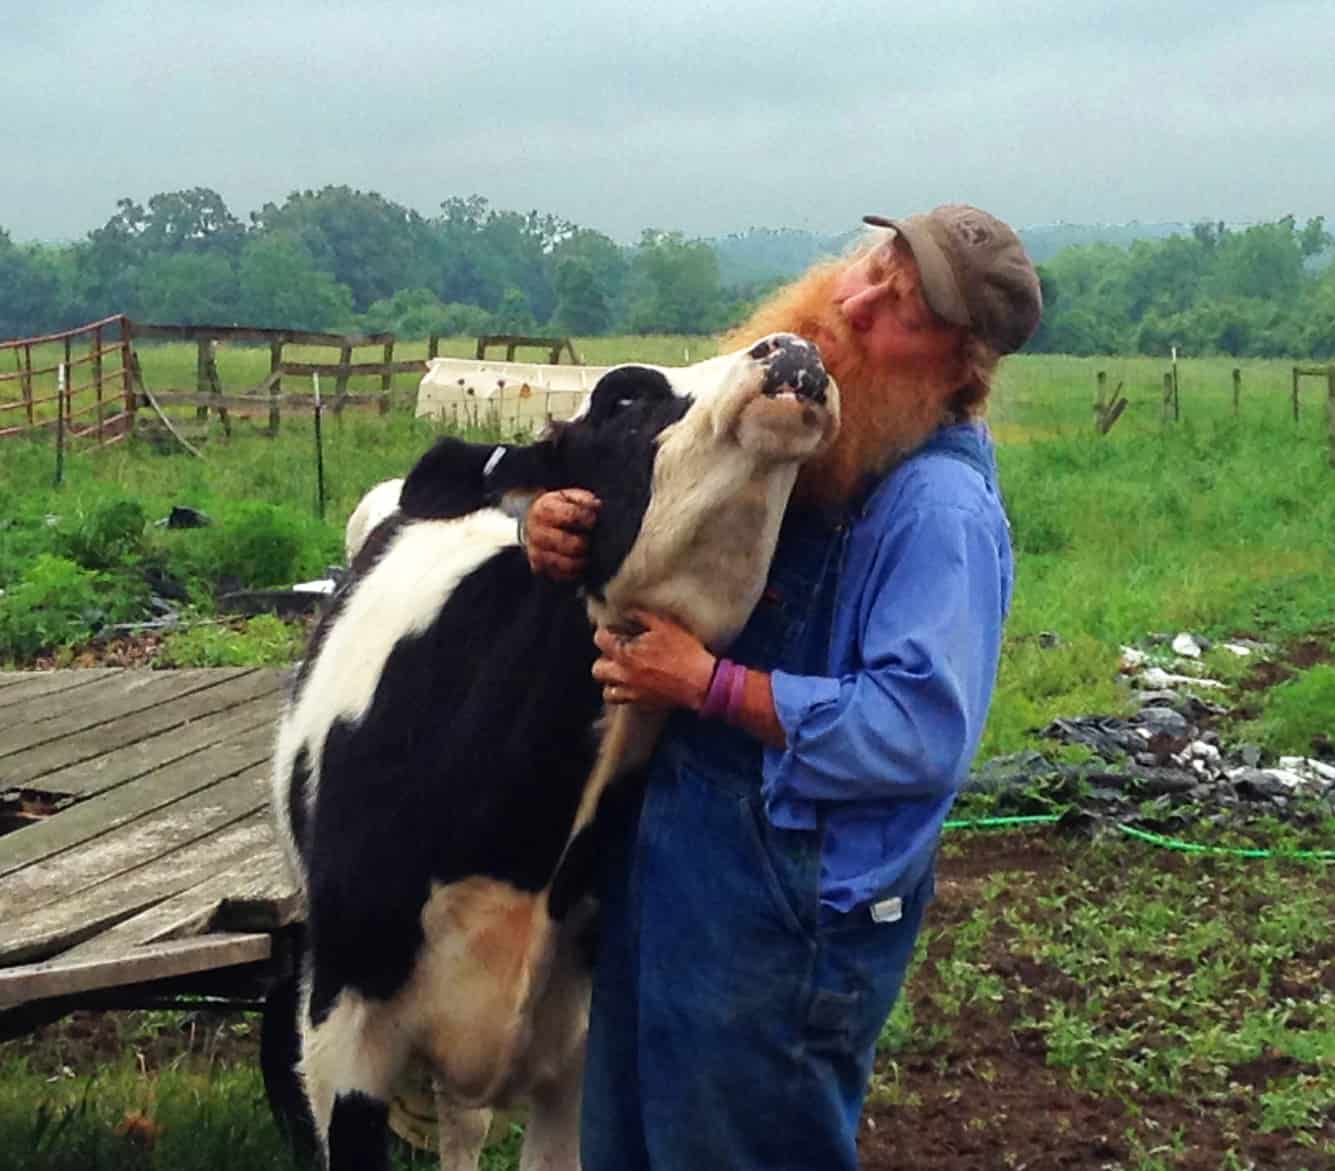 Local dairy farmer Randy Lewis, owner of Ran-Lew Farm and his one of his dairy cows named Bitty. By sourcing our milk from local dairies, we are supporting the local economy, and saving the atmosphere from millions of tons of CO2 that are produced by shipping food products around the globe multiple times for processing.